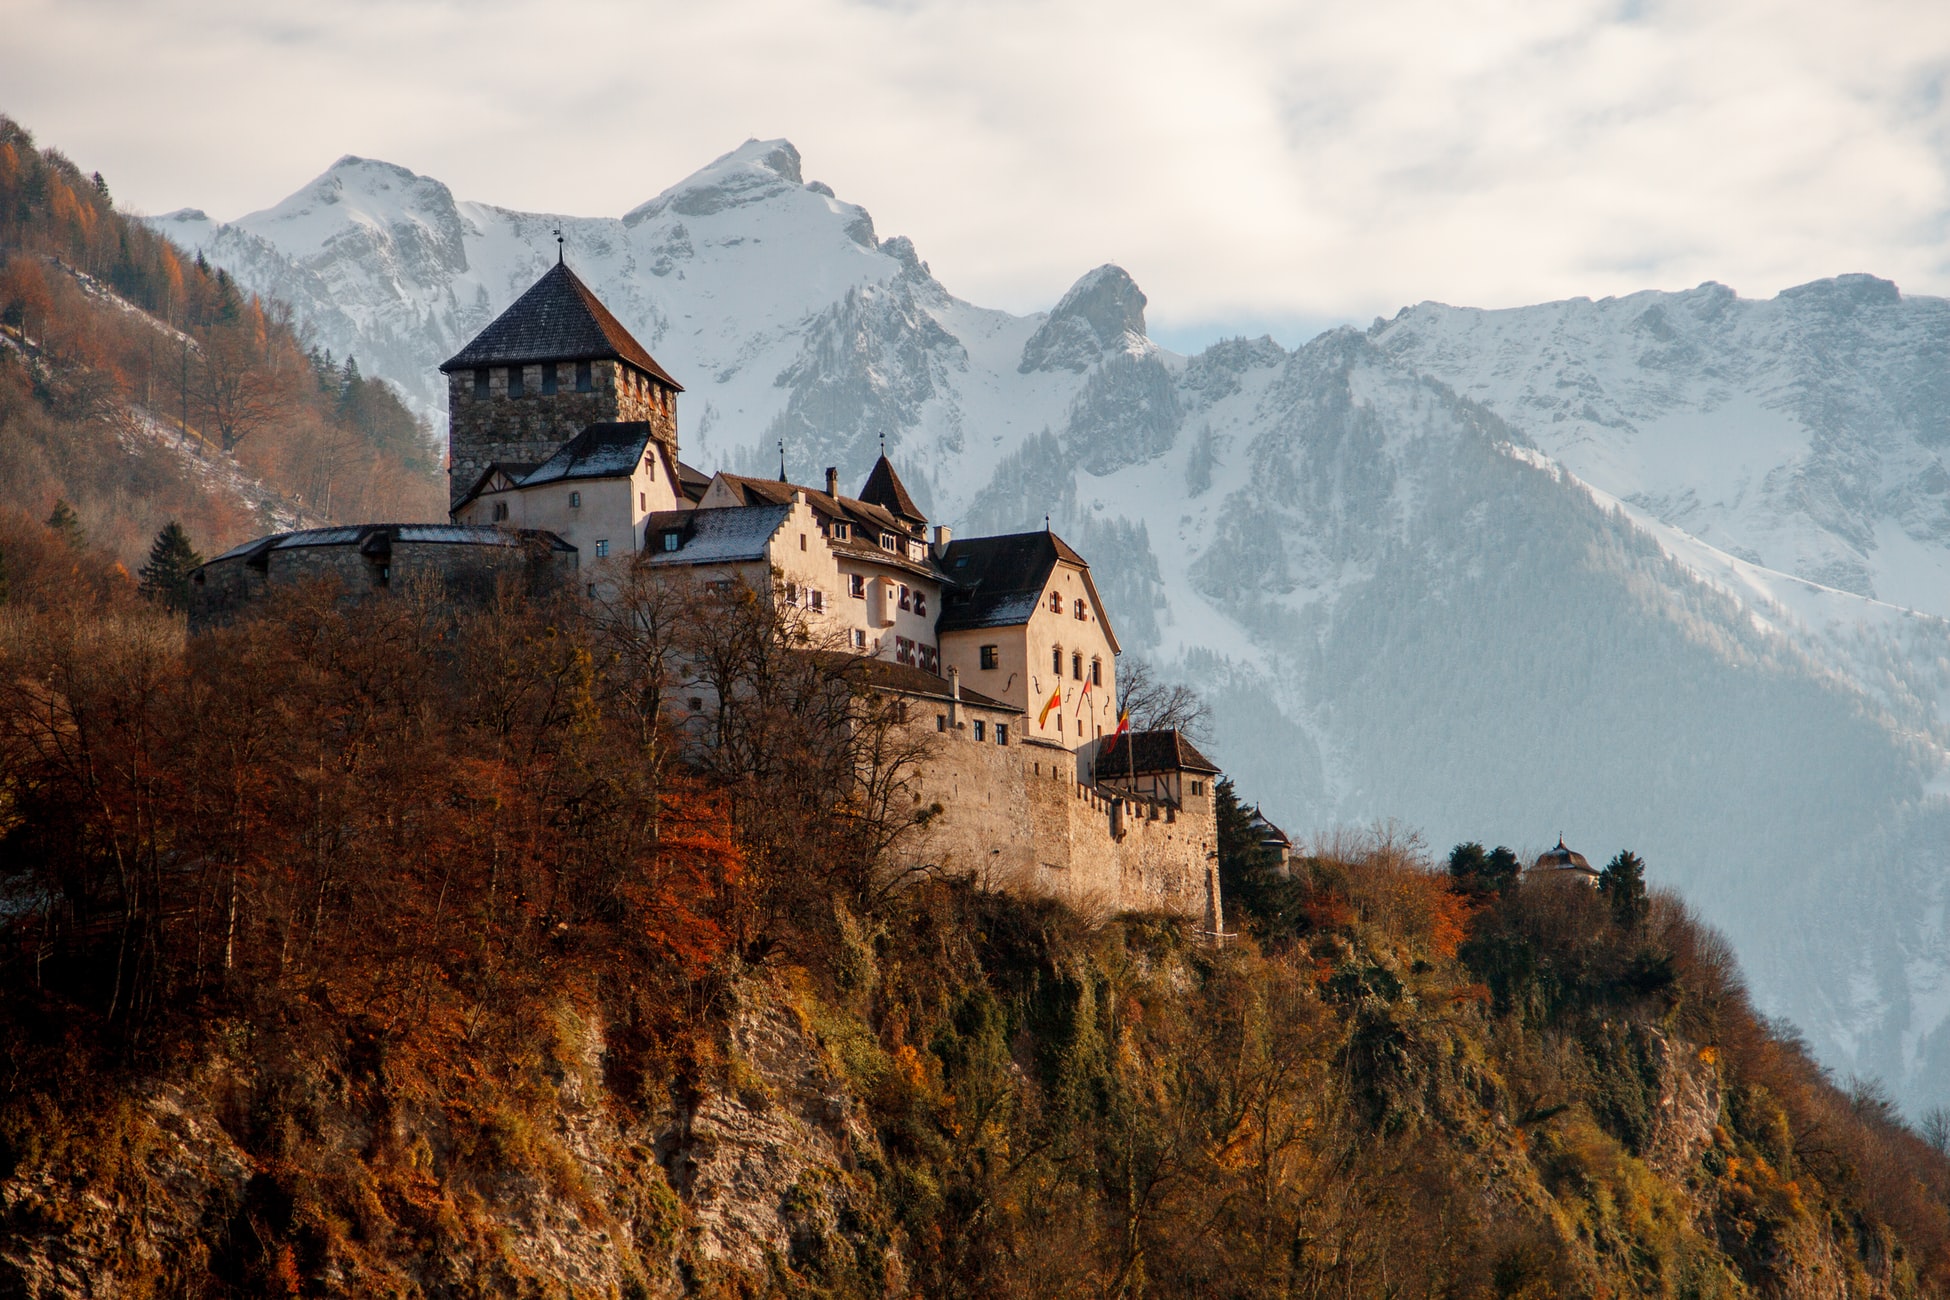 castle on hilltop surrounded by mountains